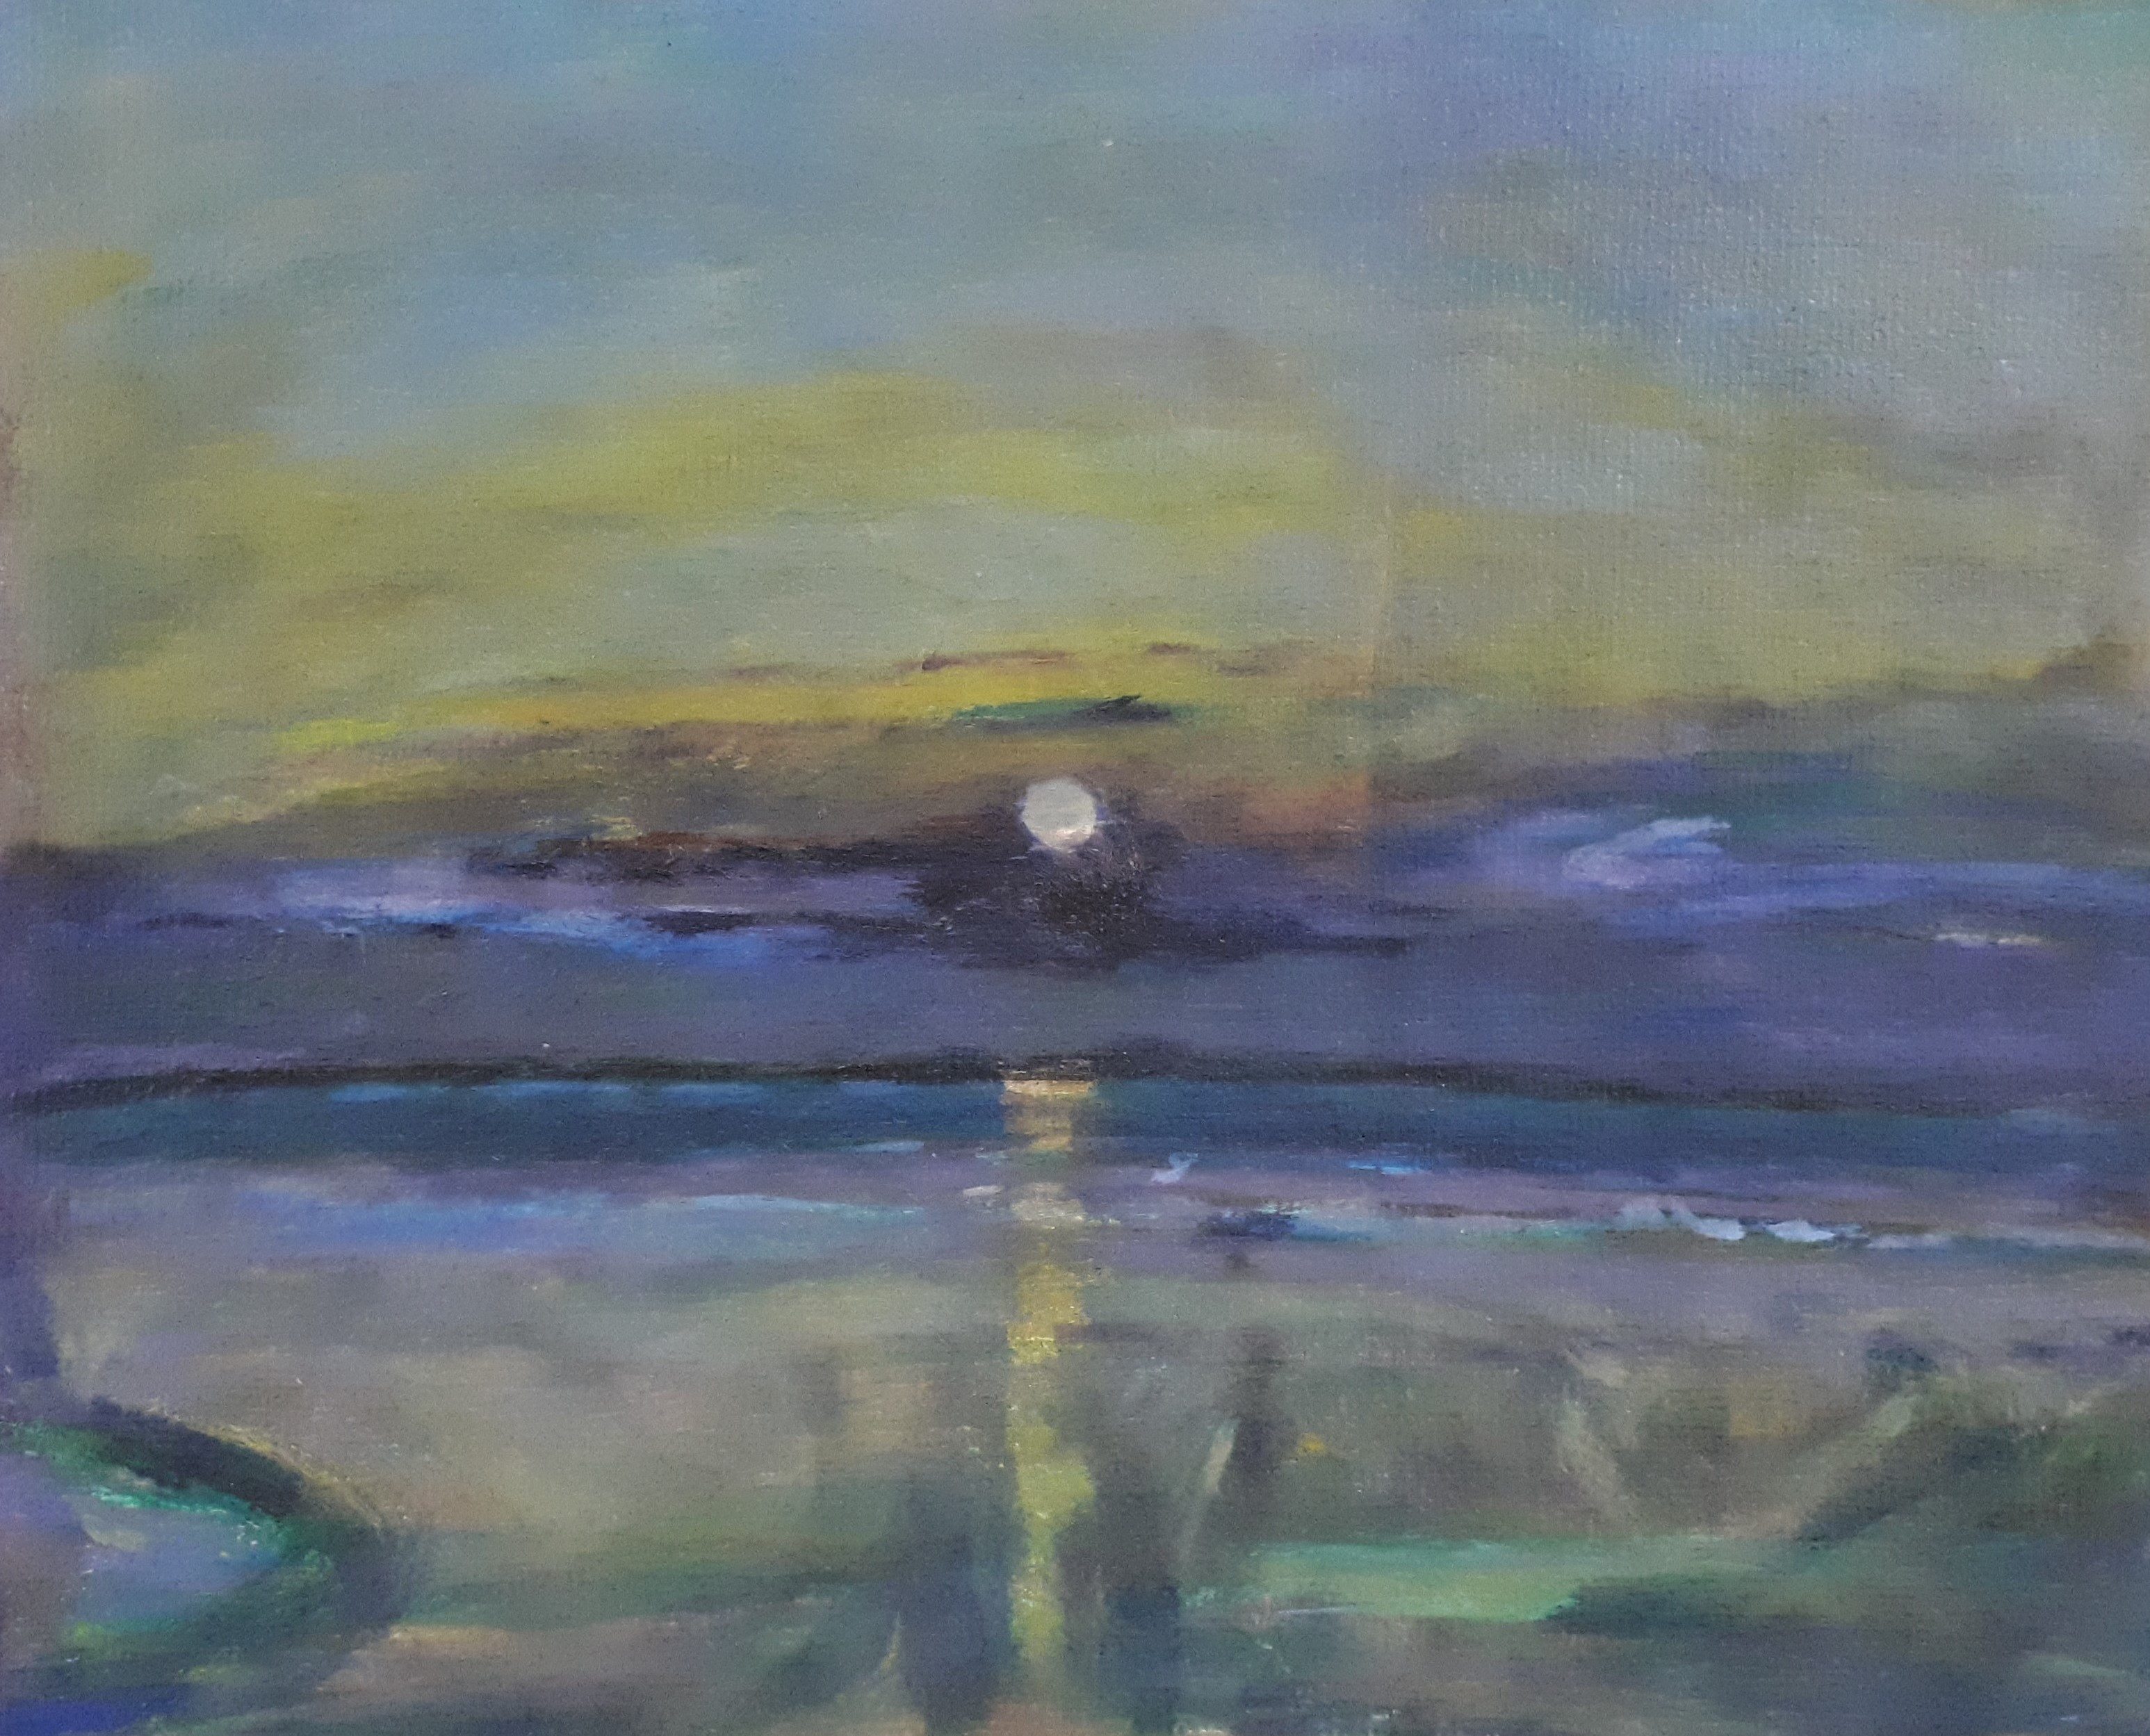 A Full moon in a purple and yellow sky. The yellow moonlight reflects on a teal coloured sea